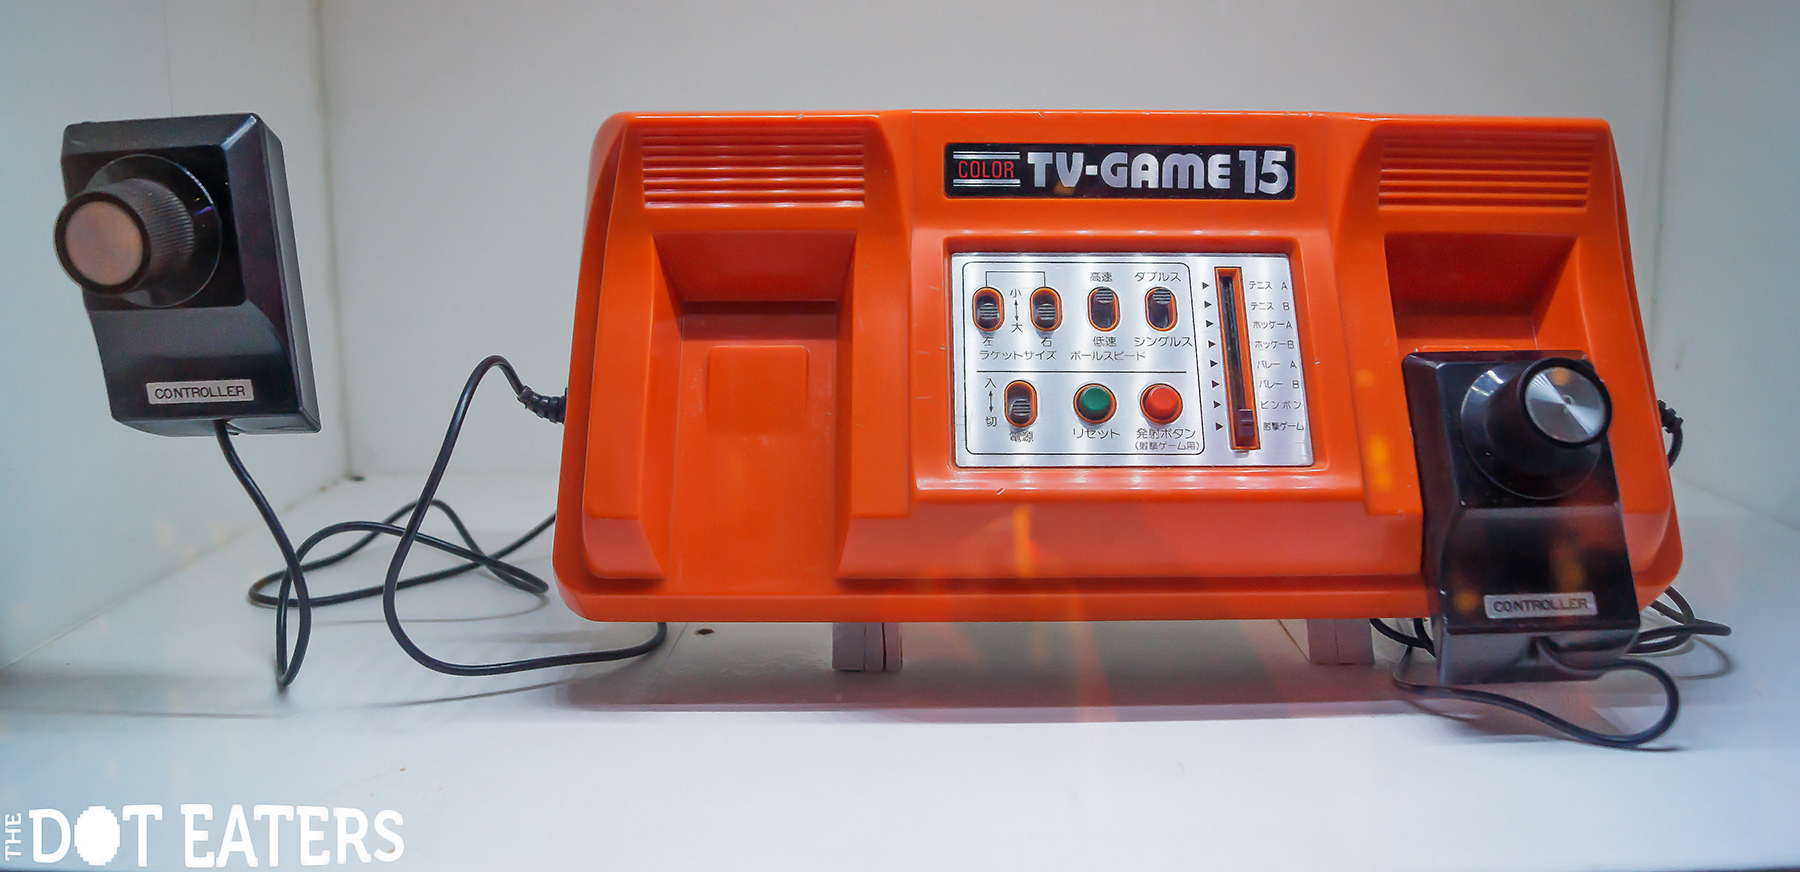 The Color TV Game 15, a home video game console by Nintendo 1977